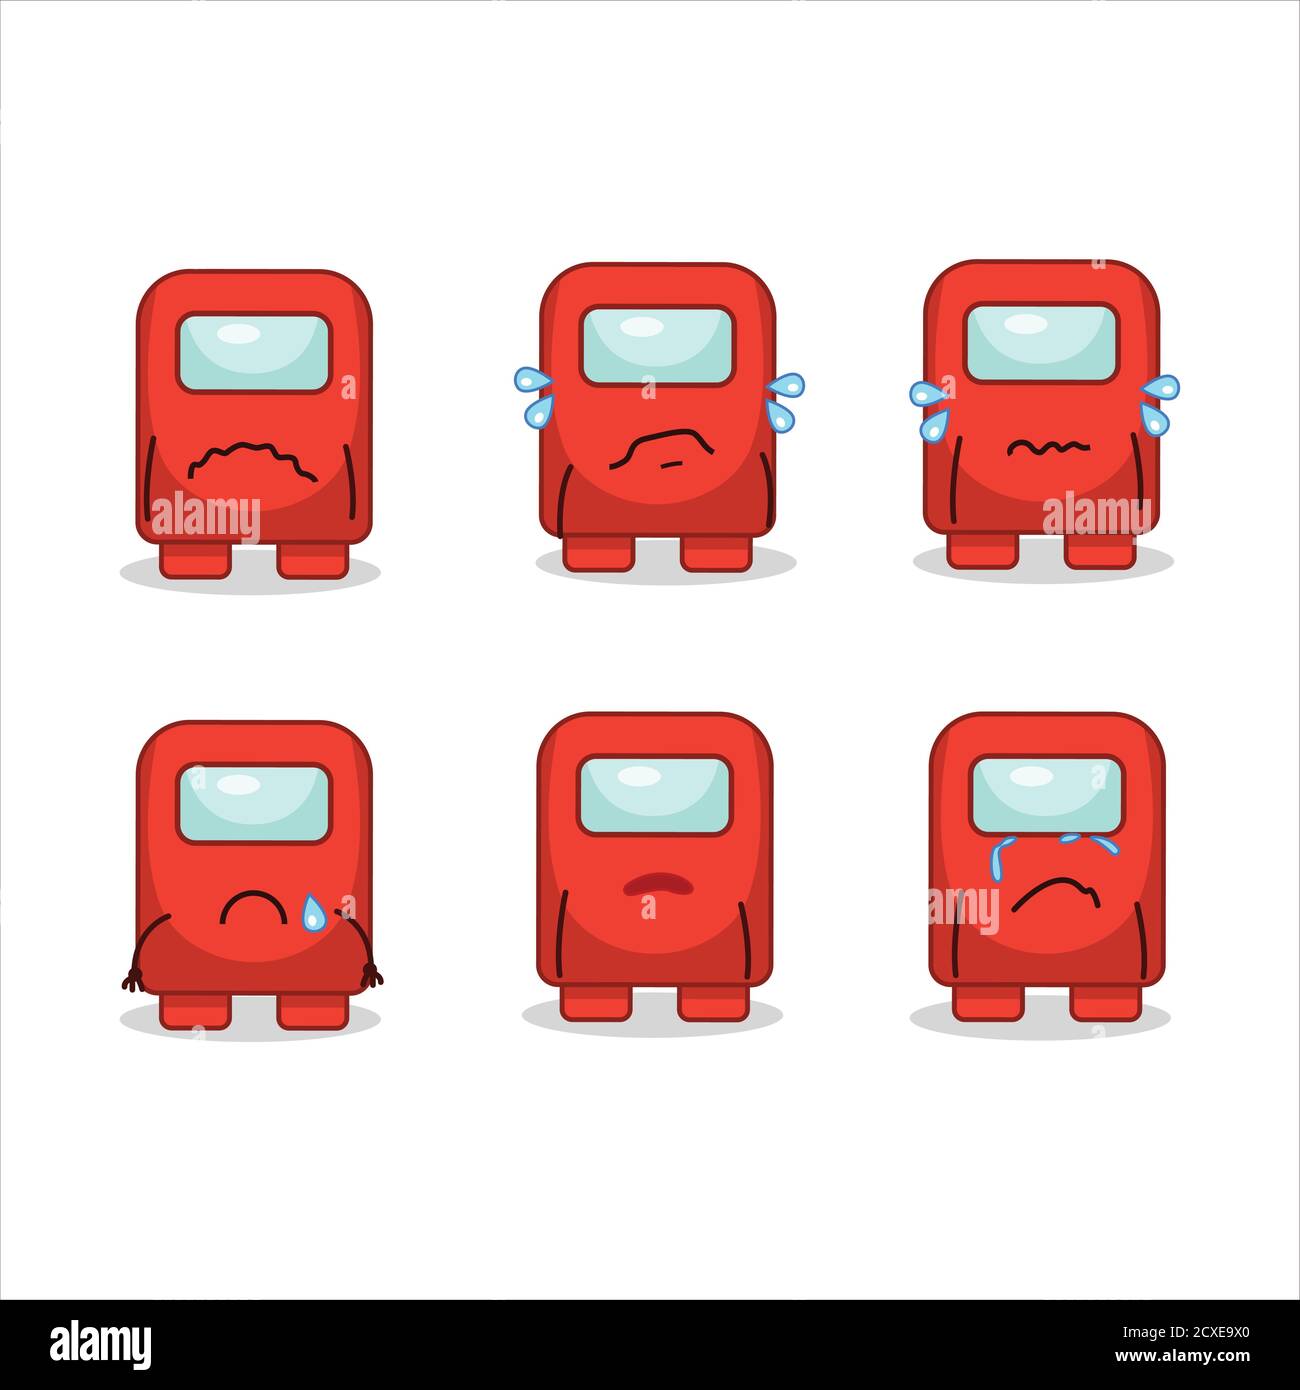 Among us red cartoon character with sad expression Stock Vector